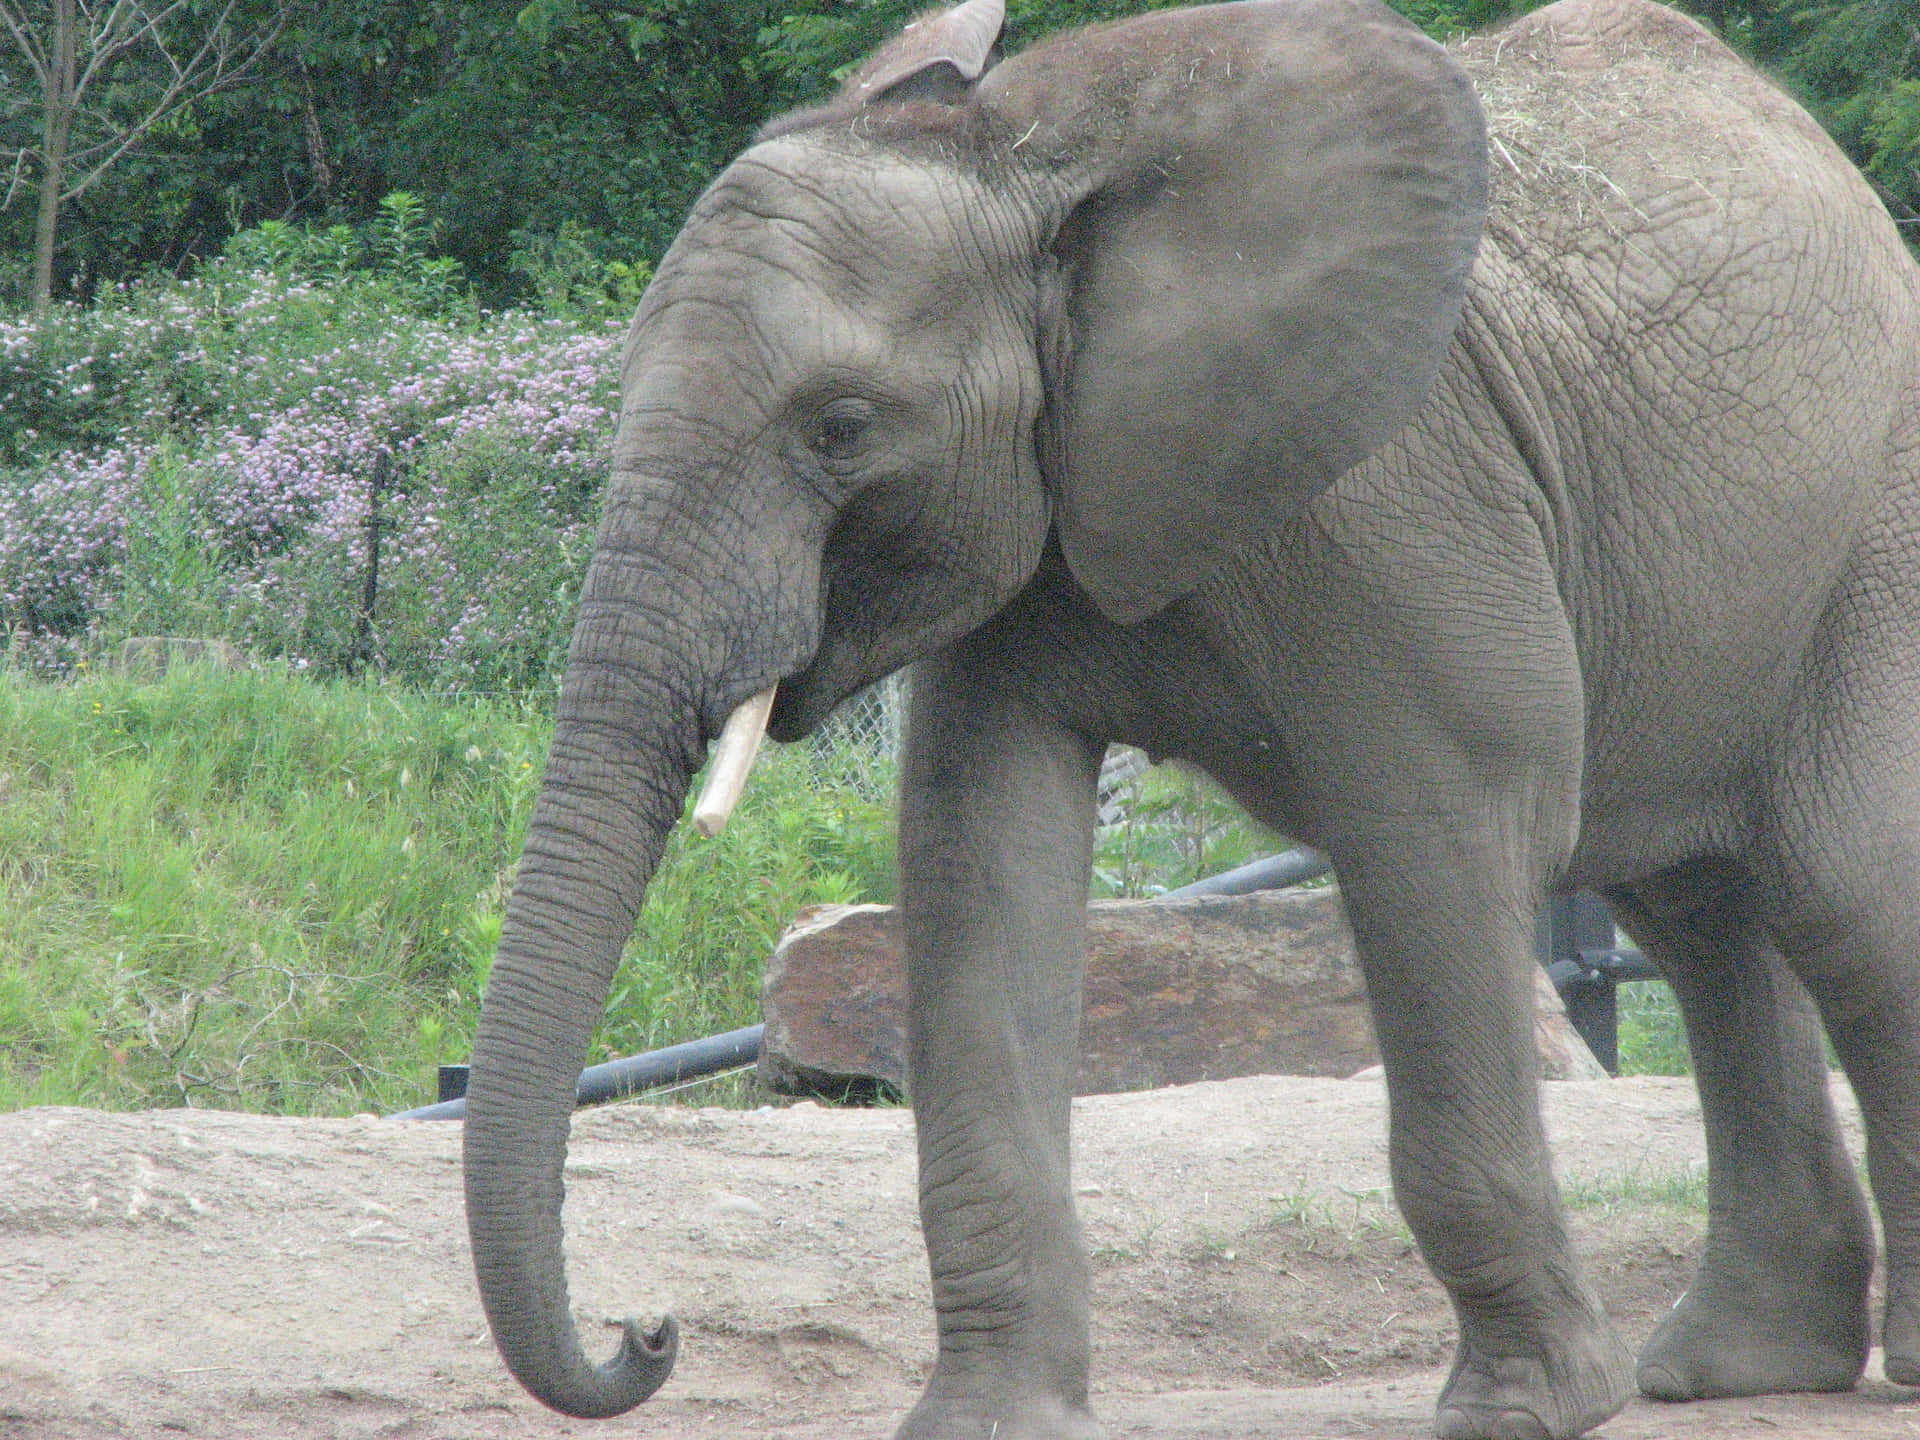 Cuteness overload! A baby elephant showcasing its playful nature in the zoo.